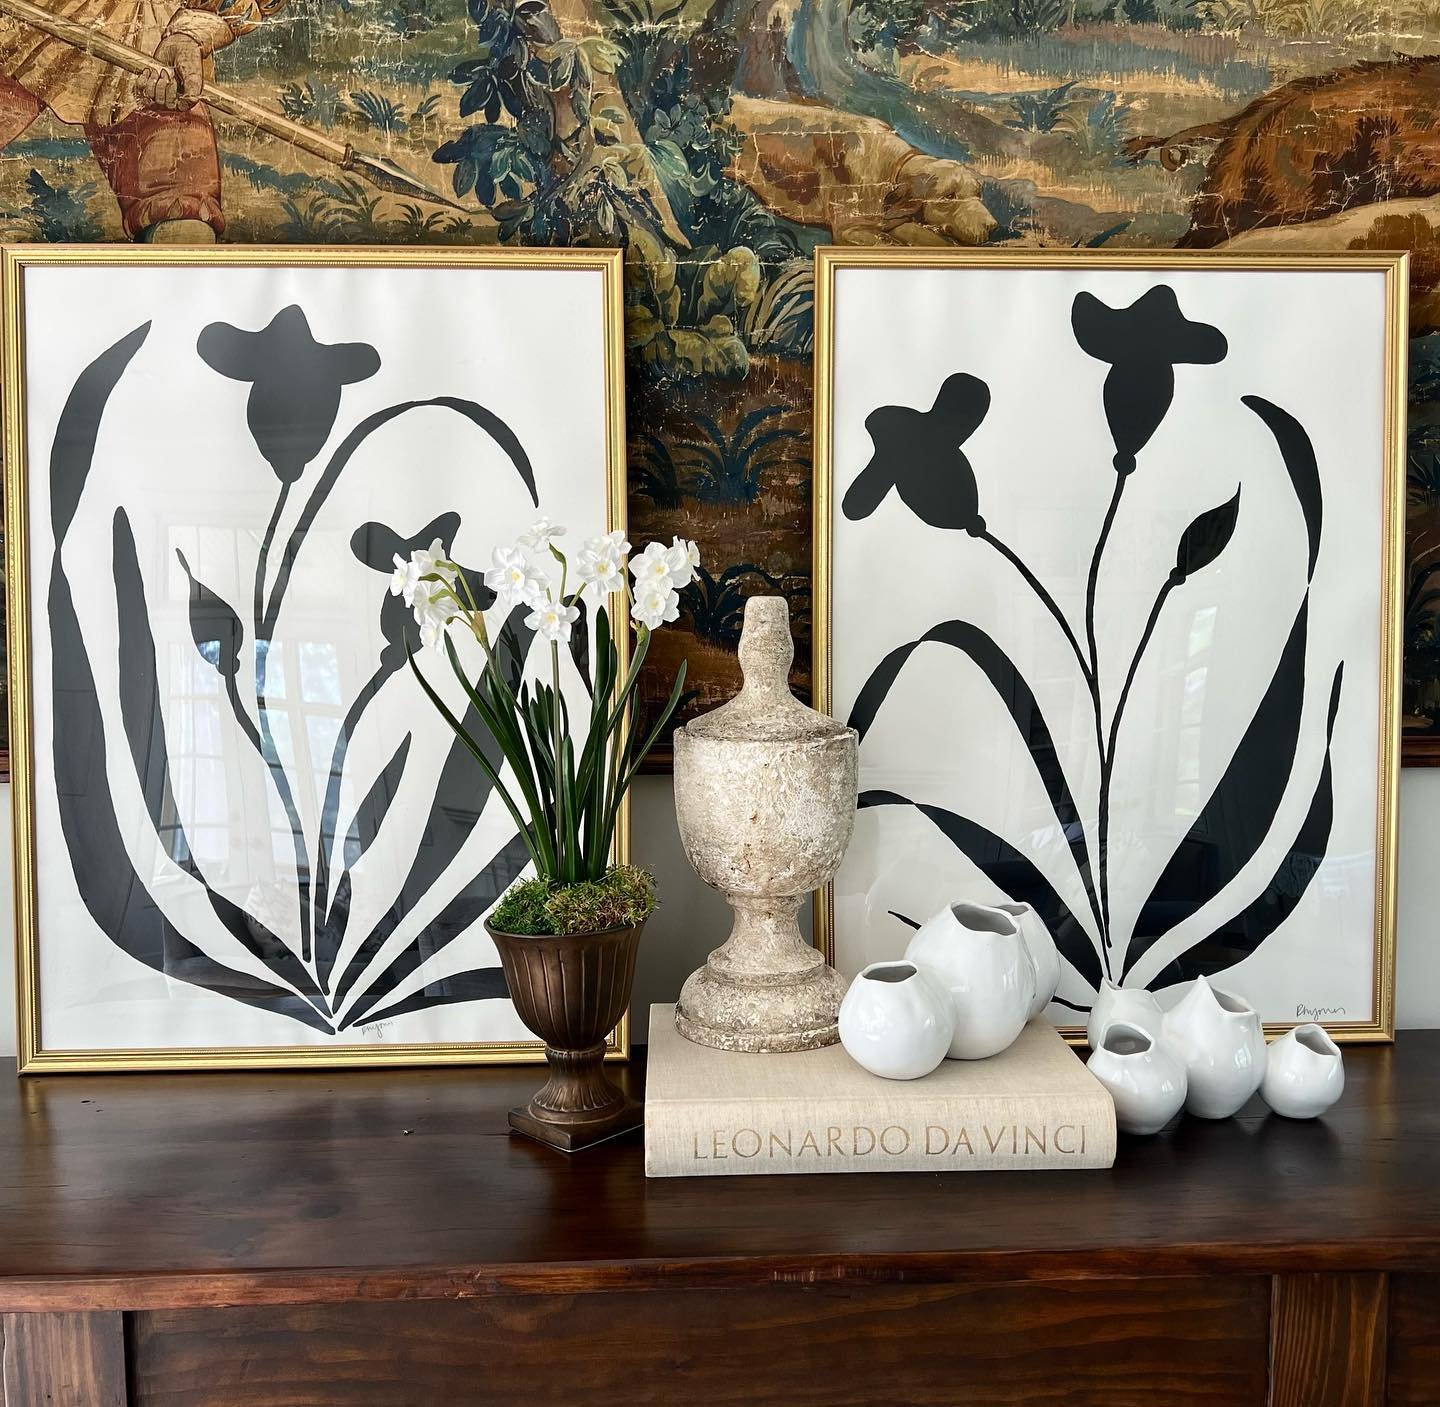 I love this larger 23x31 inch pair and can envision them on either side of an entryway or stacked on top of one other in a room with tall ceilings. Just having so much fun painting these simultaneously modern, classic, and elegant botanics in rich bl